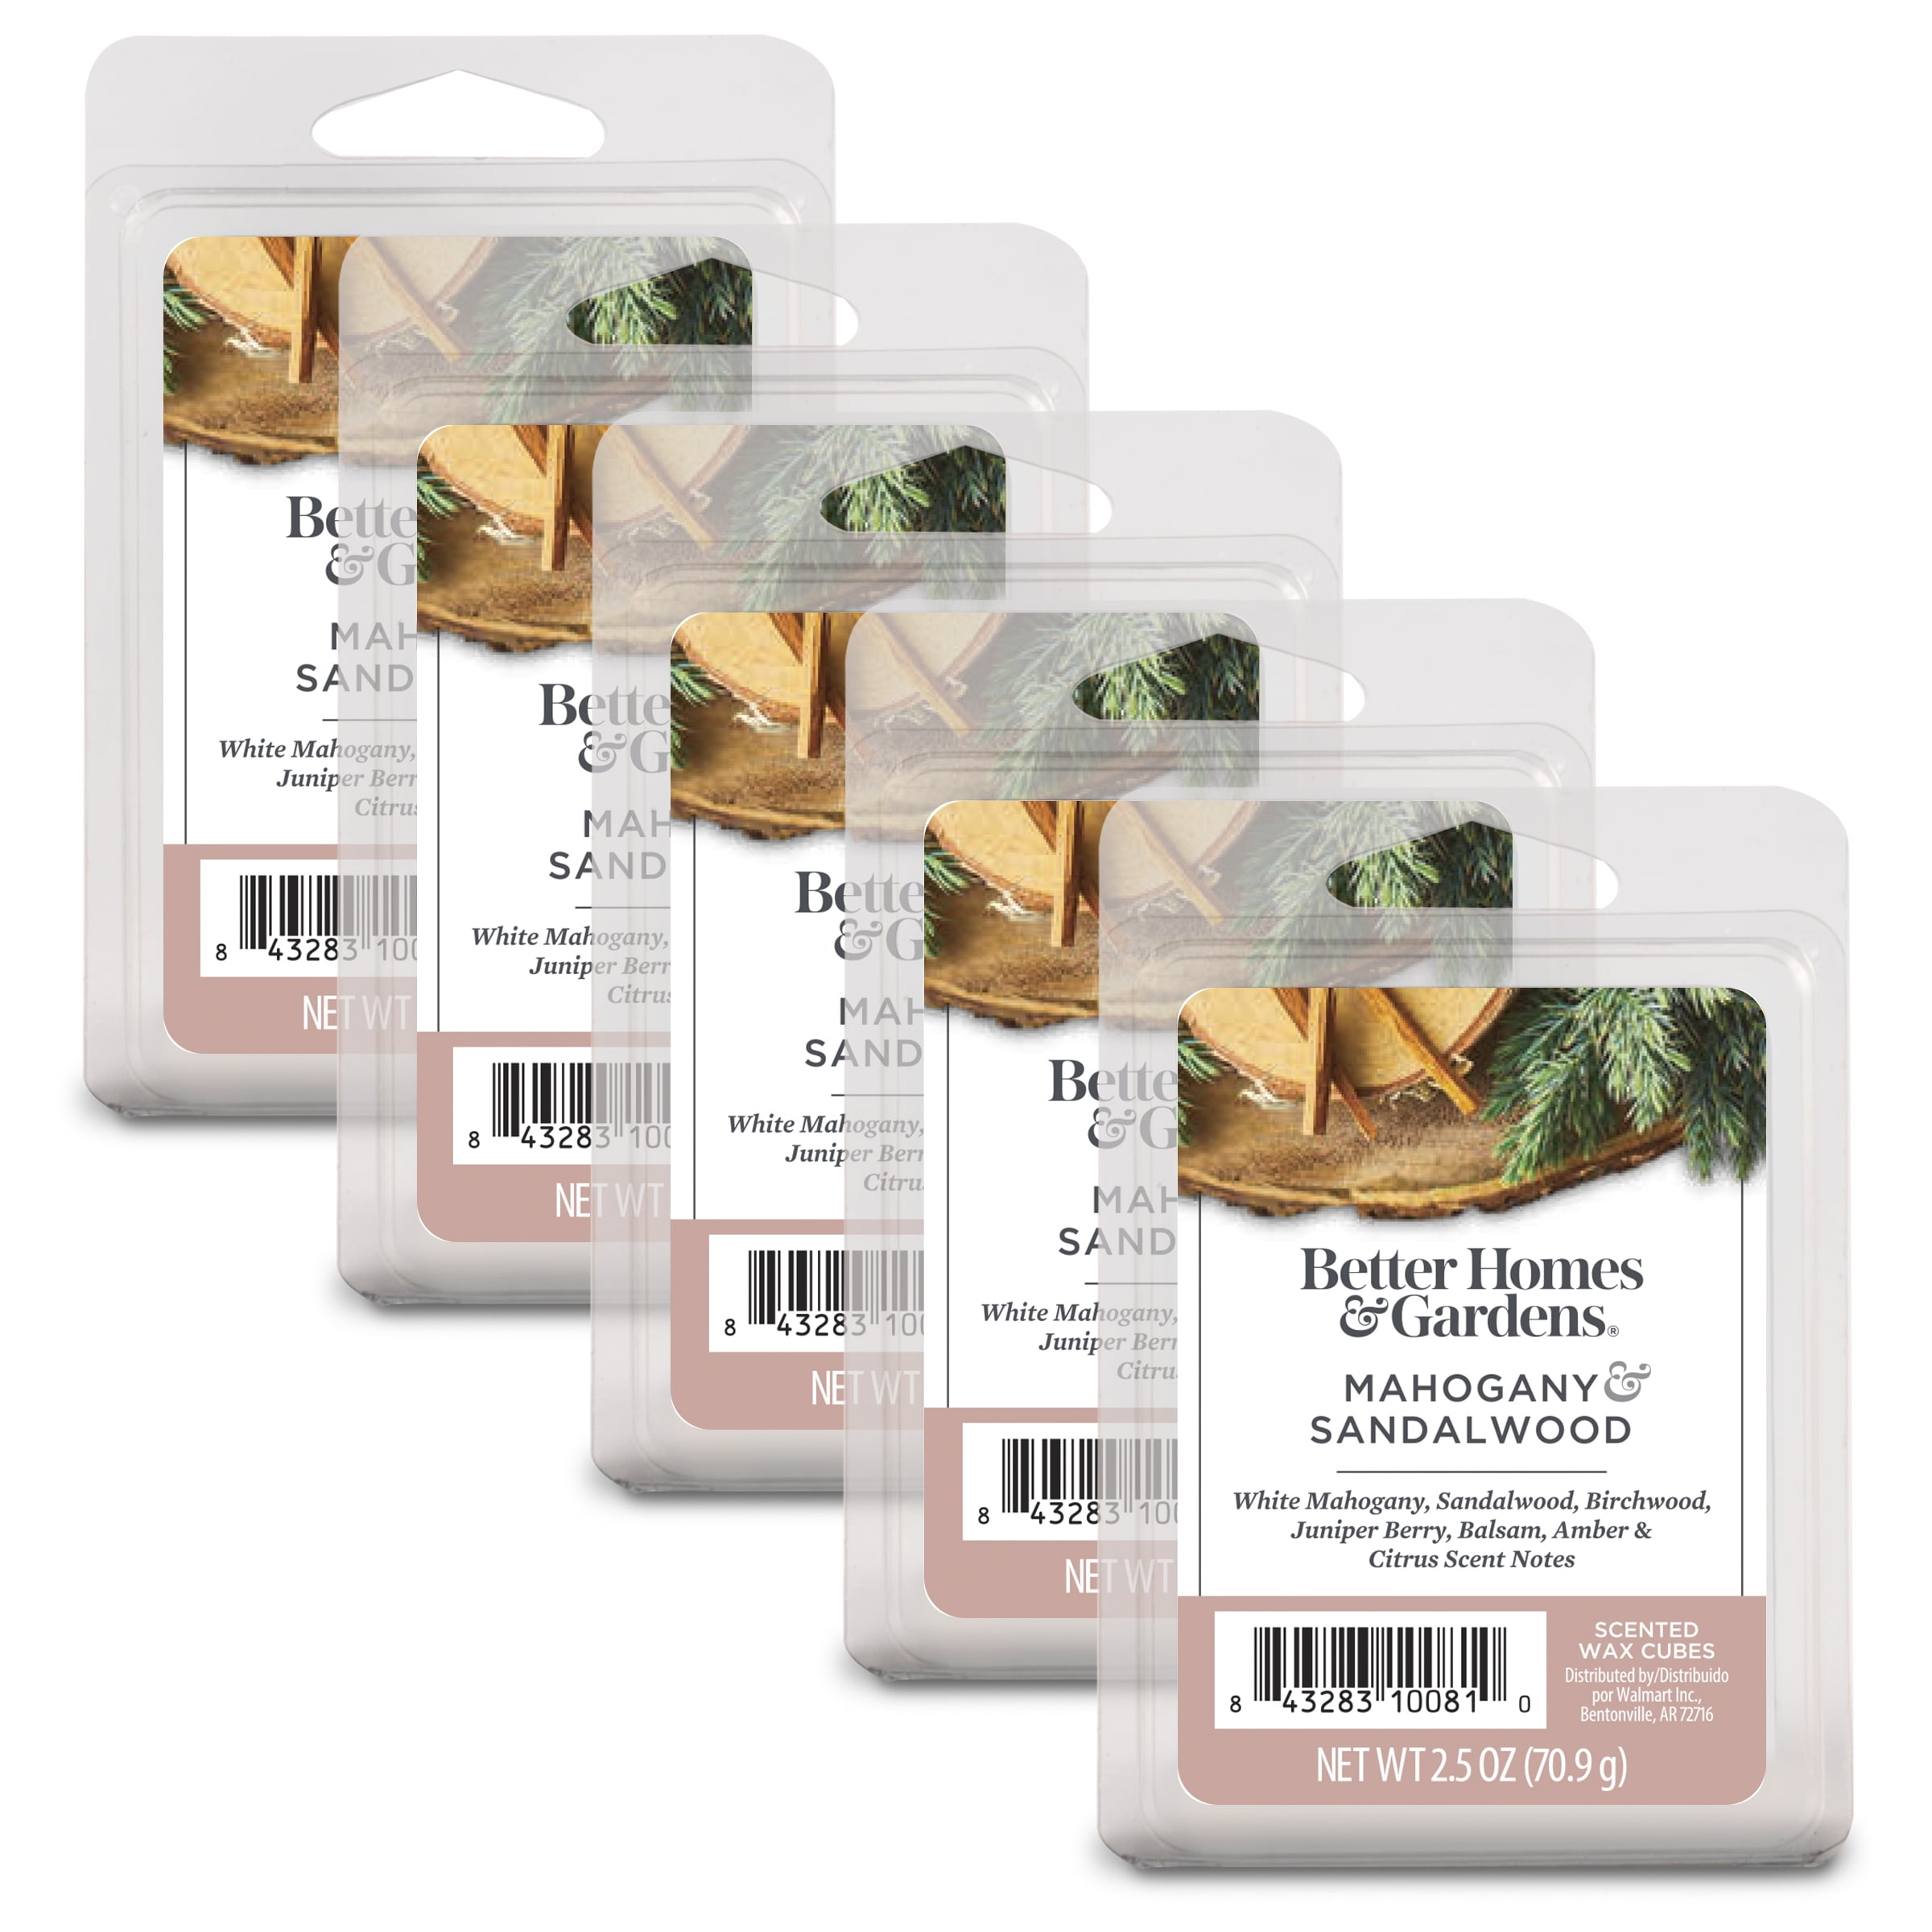 Mahogany & Sandalwood Scented Wax Melts, Better Homes & Gardens, 2.5 oz (5-Pack), Size: 12.5 oz